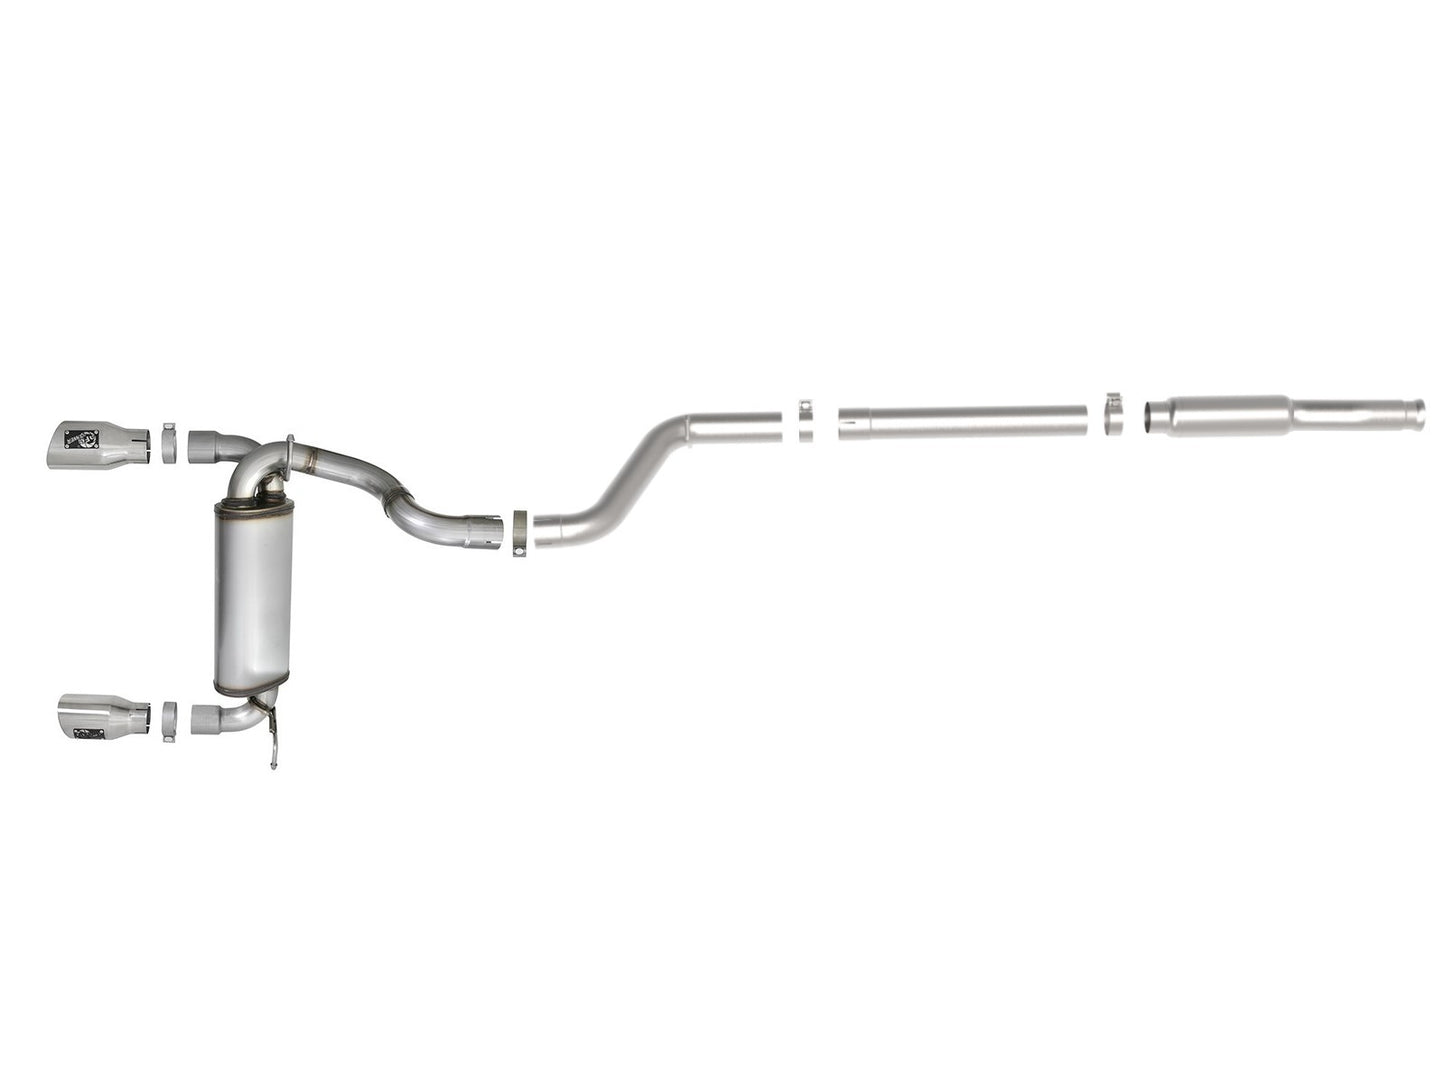 AFE POWER Rebel Series 3"-2.5" Stainless Catback Exhaust System w/ Polished Tips Jeep Wrangler JL L4 2.0L 2018-2021